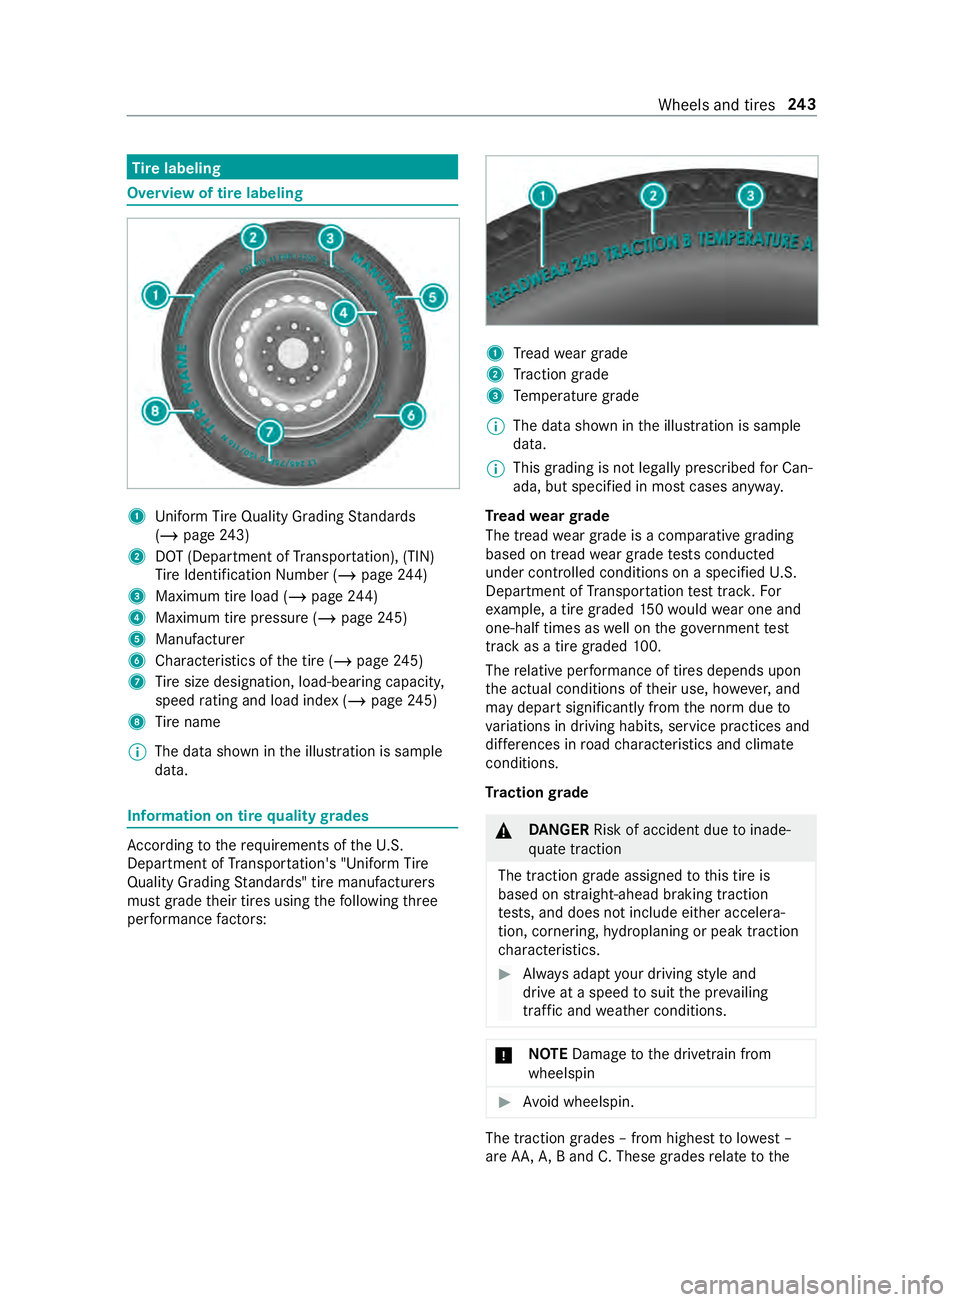 MERCEDES-BENZ SPRINTER 2019  MY19 with 7” screen Ti
re labeling Overview of tire labeling
1
Uniform Ti reQuality Grading Standards
(/ page 243)
2 DOT (Depa rtment of Transpor tation), (TIN)
Ti re Identification Number (/ page244)
3 Maximum tire load